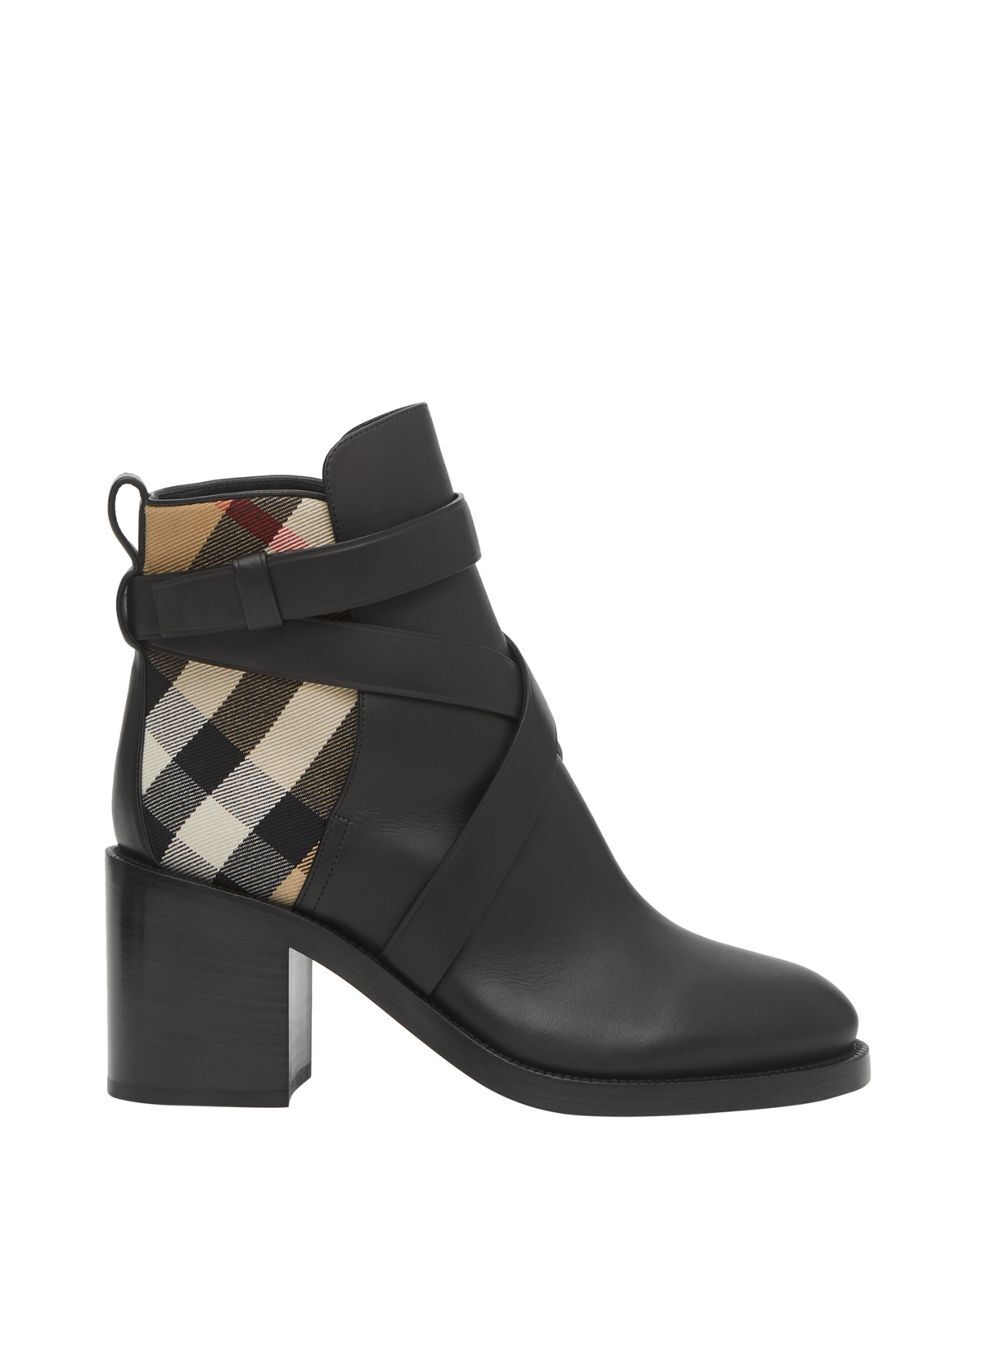 burberry womens boots